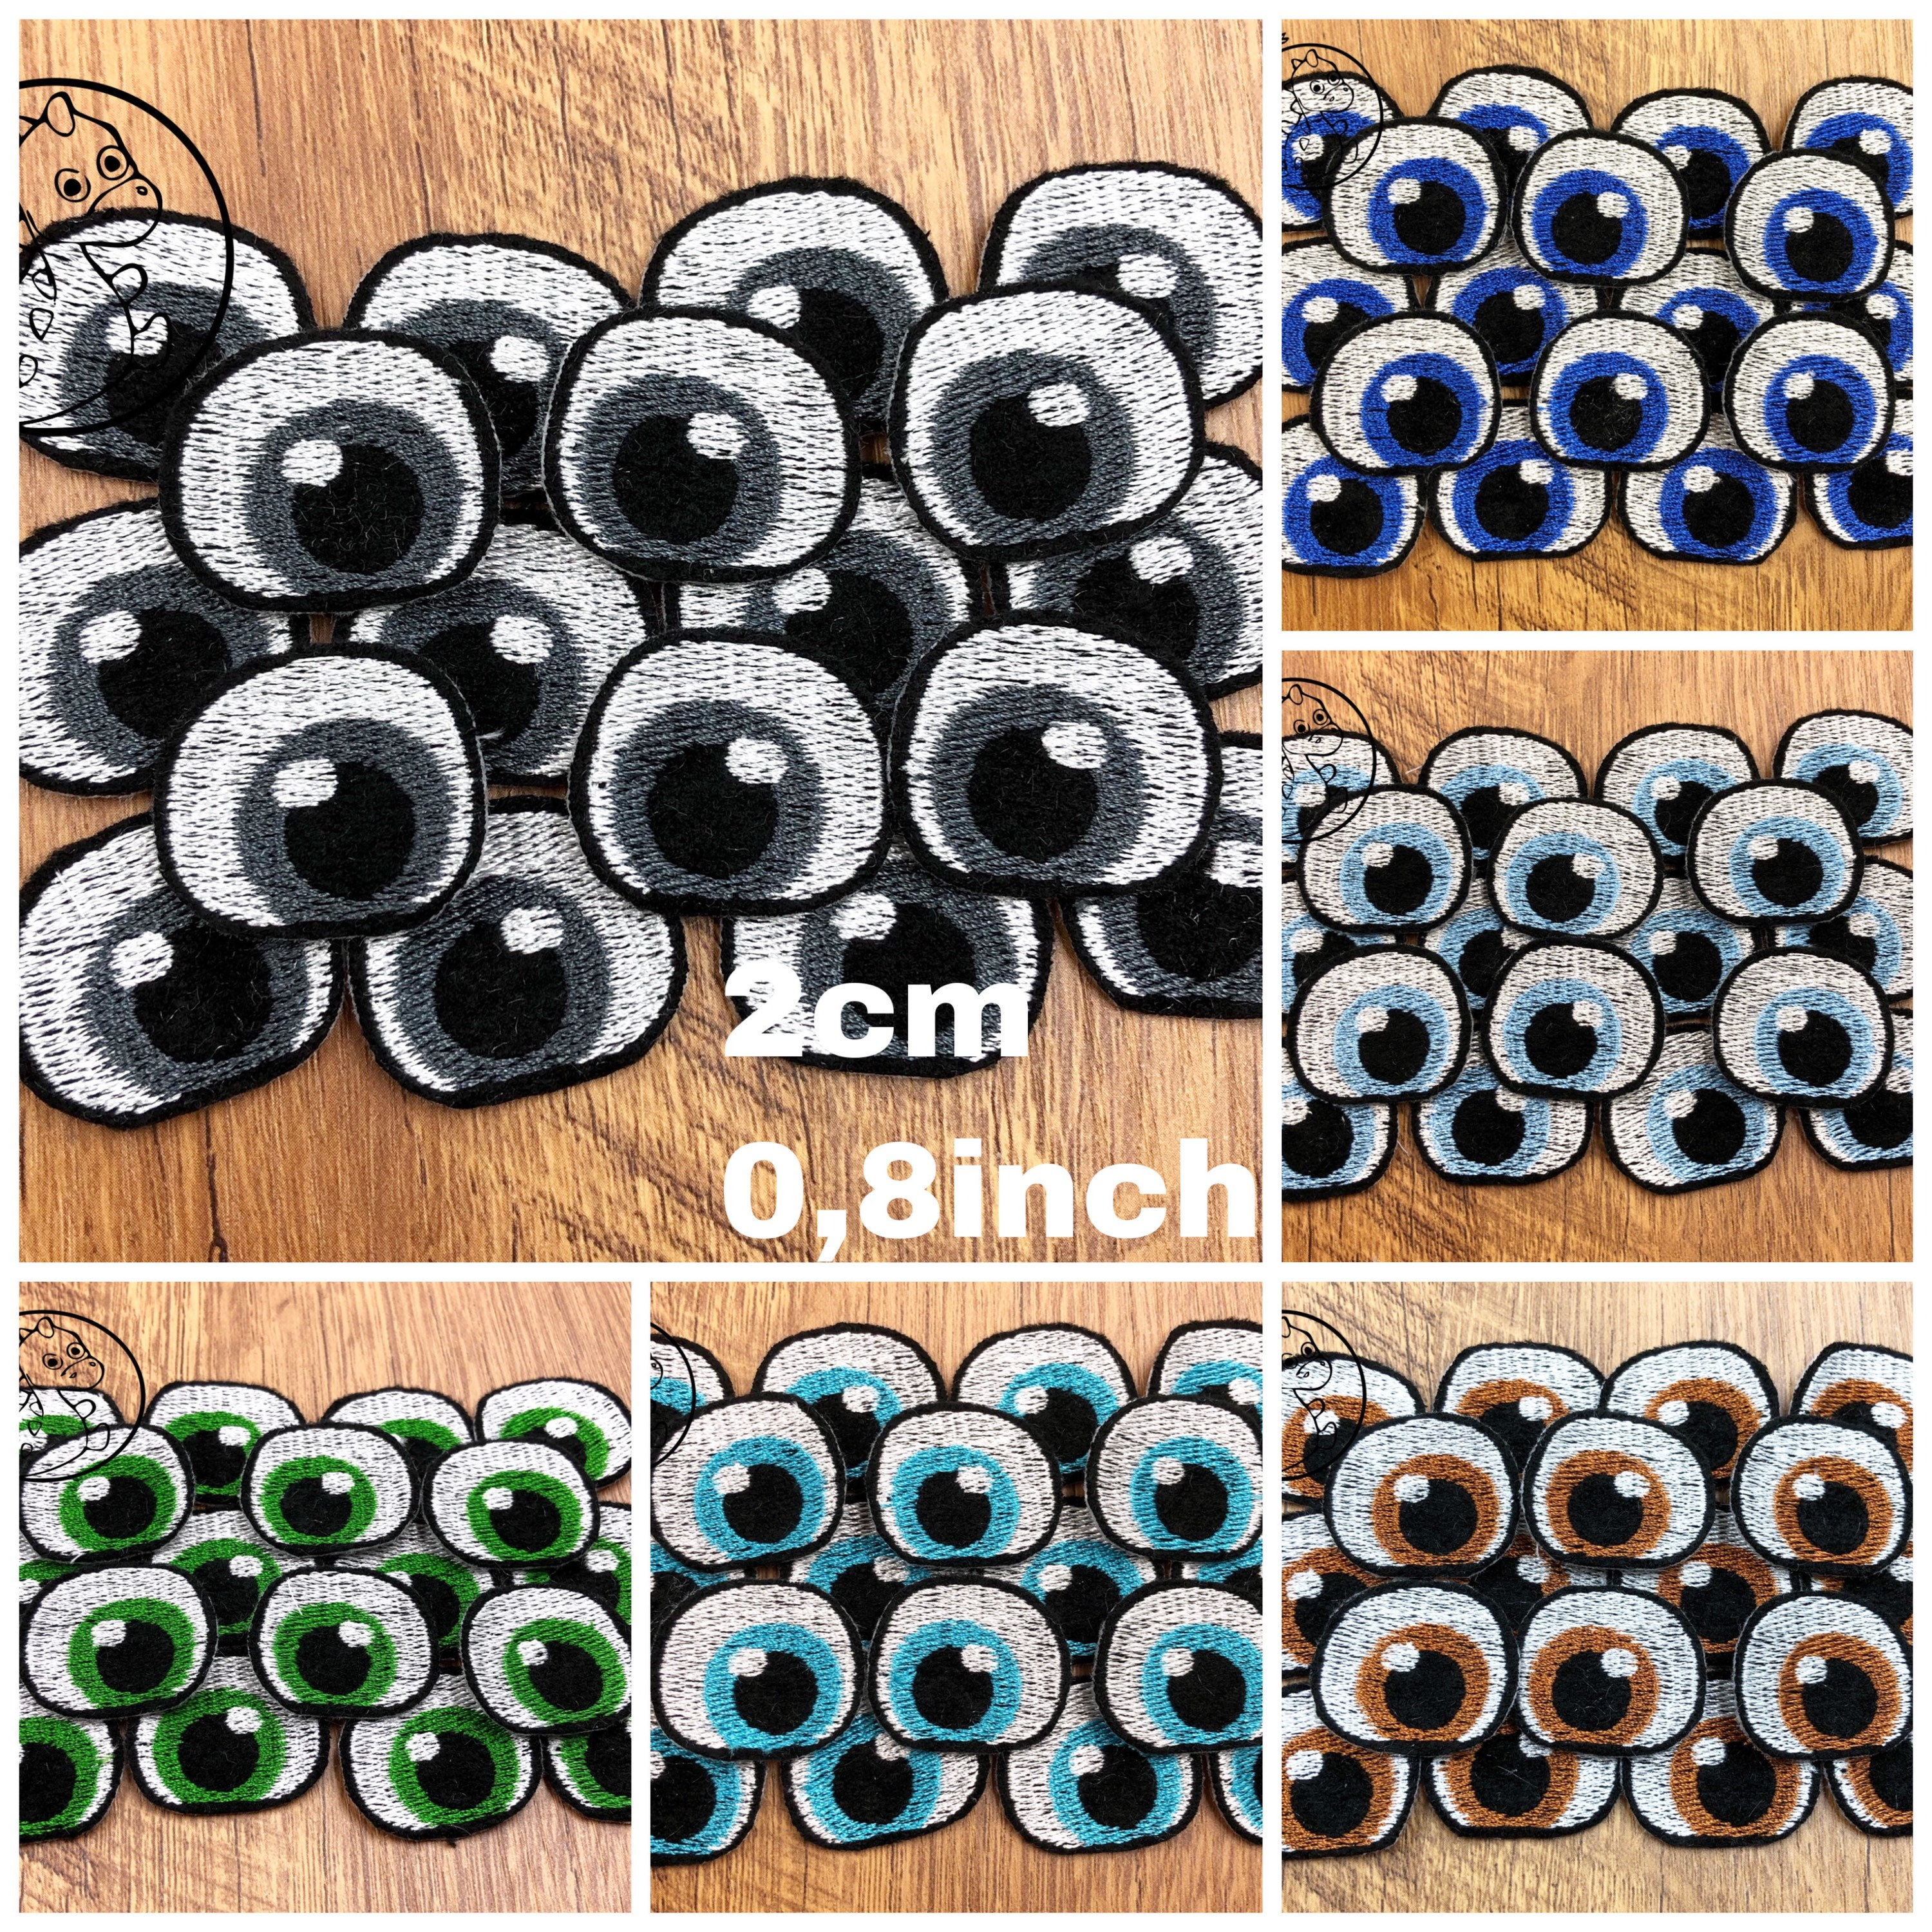 Small Button Eyes - Button Eye Sets for Amigurumi — Wonky World Creations